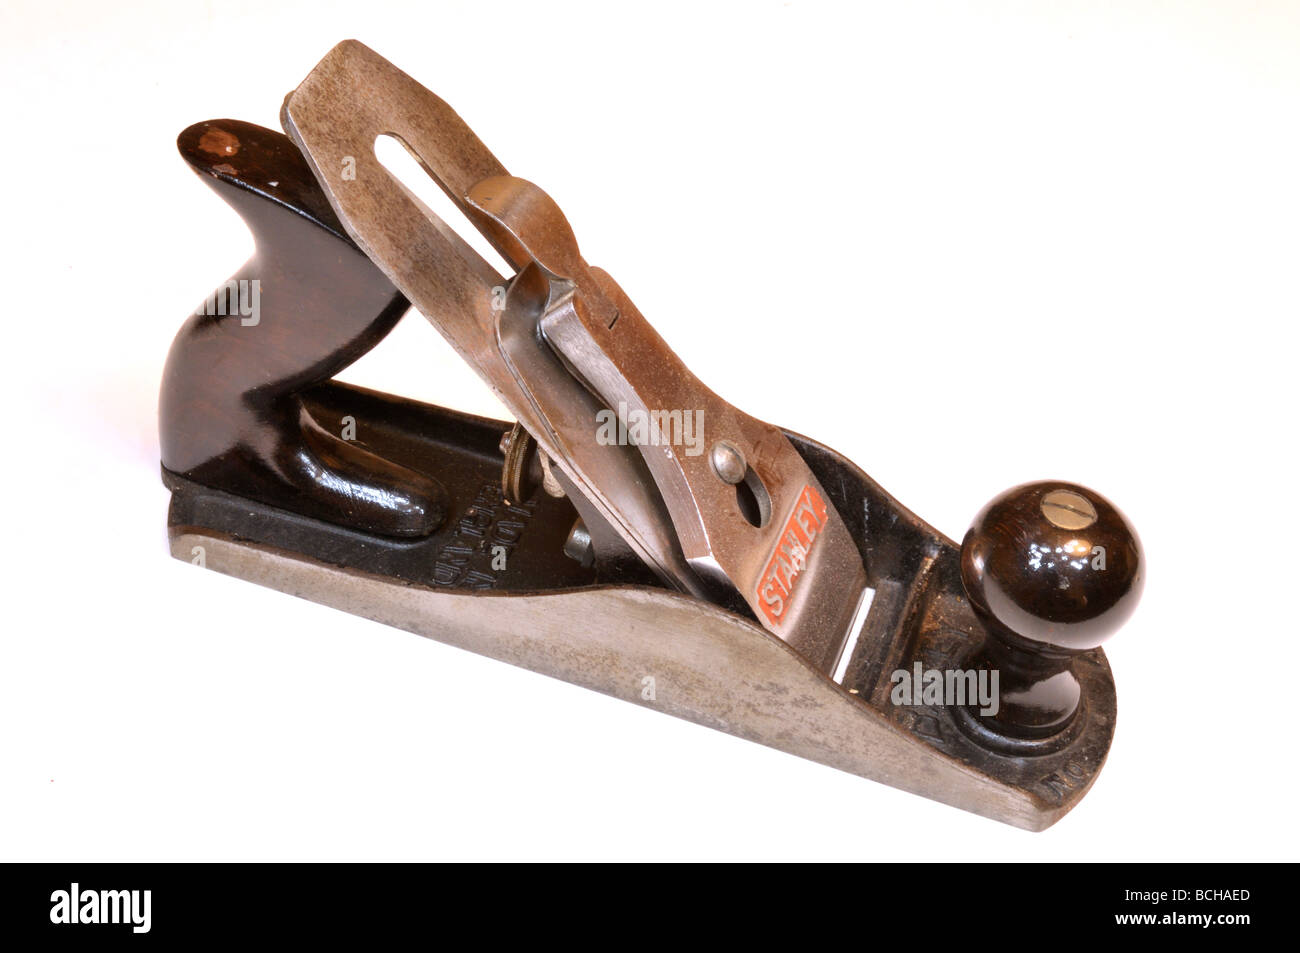 Stanley No 4 woodworkers smoothing plane on white background Stock Photo